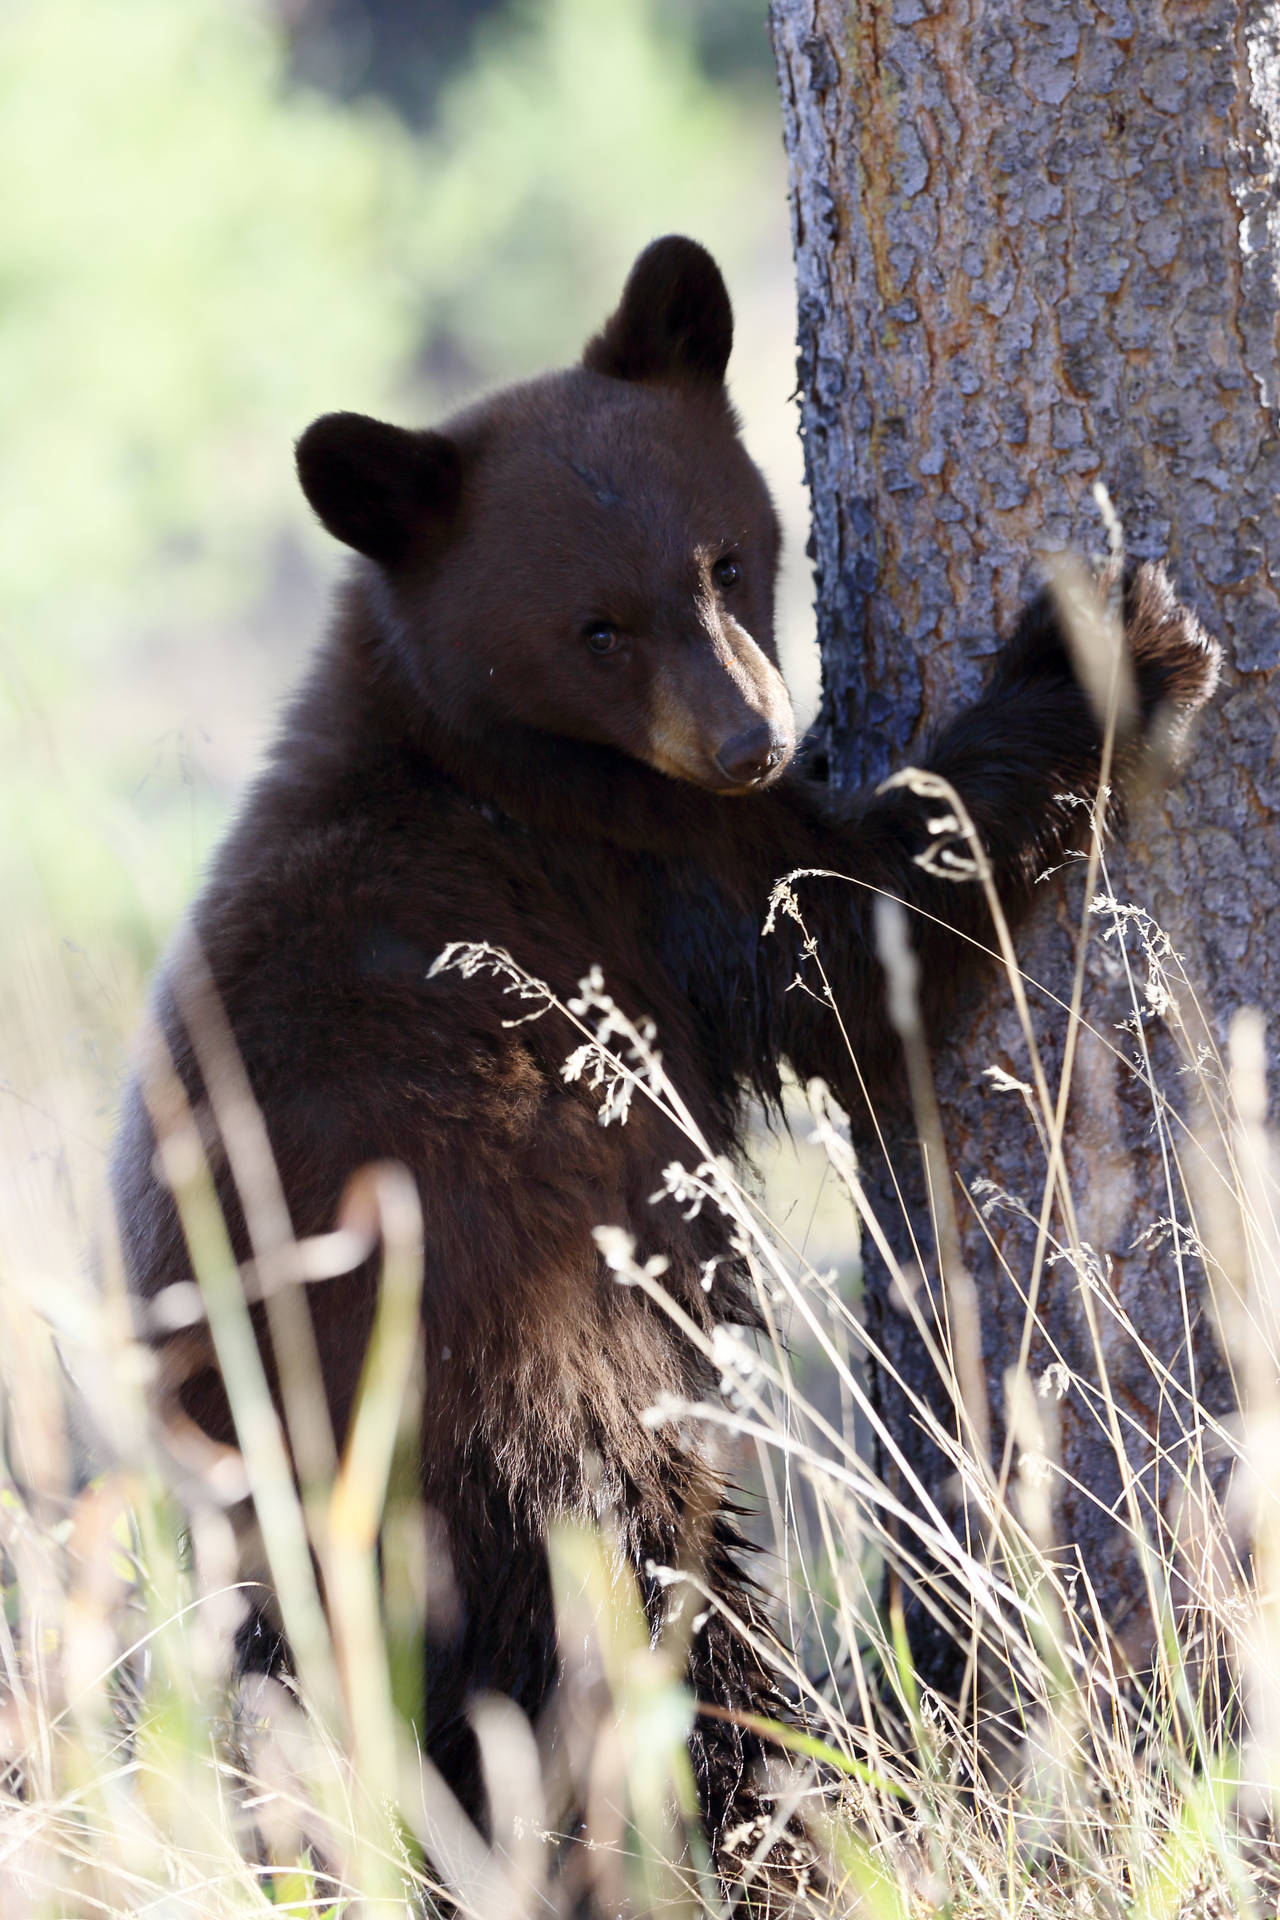 A brown bear in its natural habitat, nestled in a tree. Wallpaper